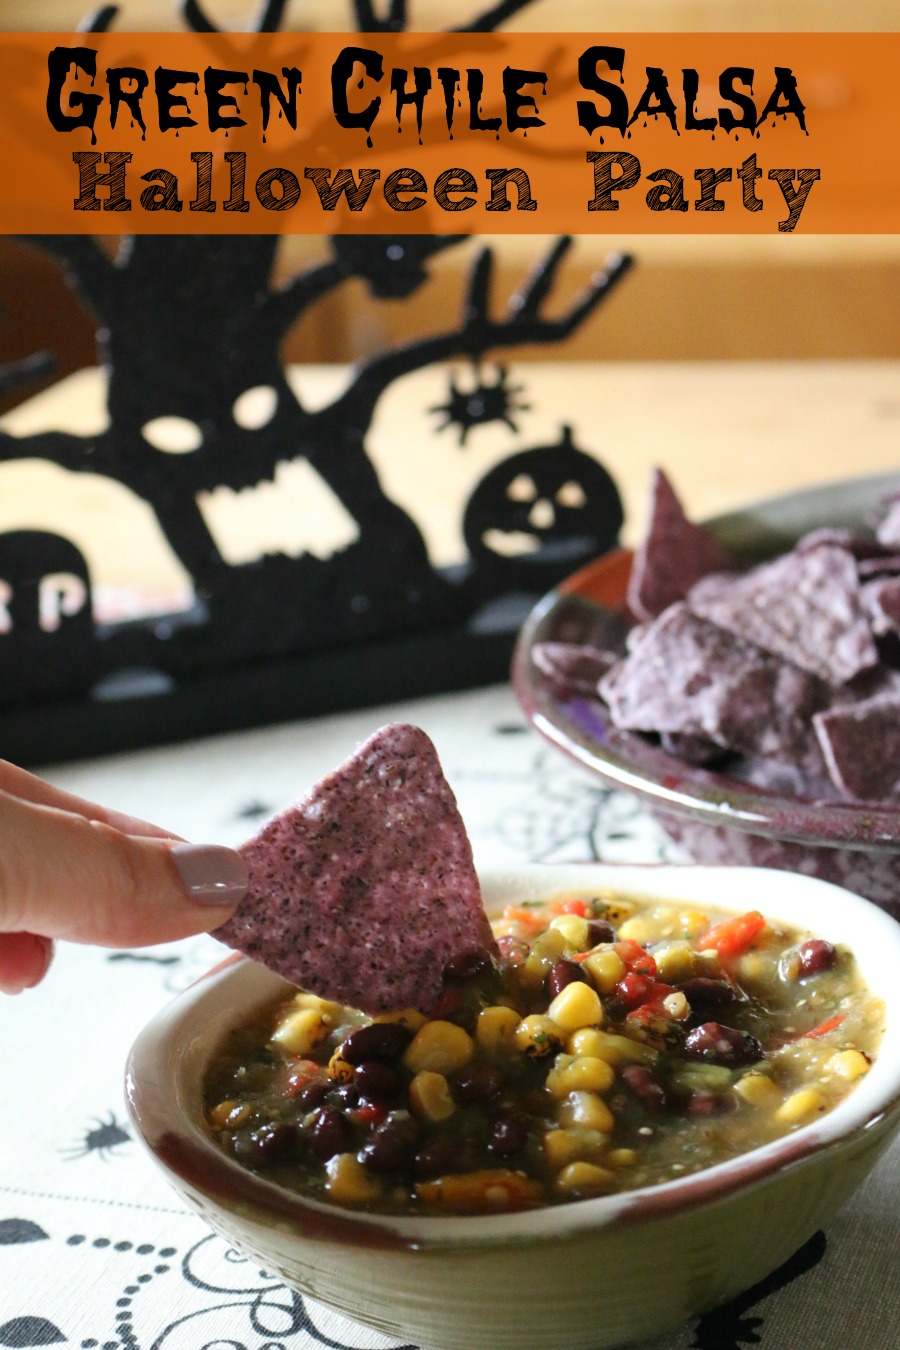 Green Chile Salsa - perfect Halloween Party Menu Idea - made in 3 Minutes!